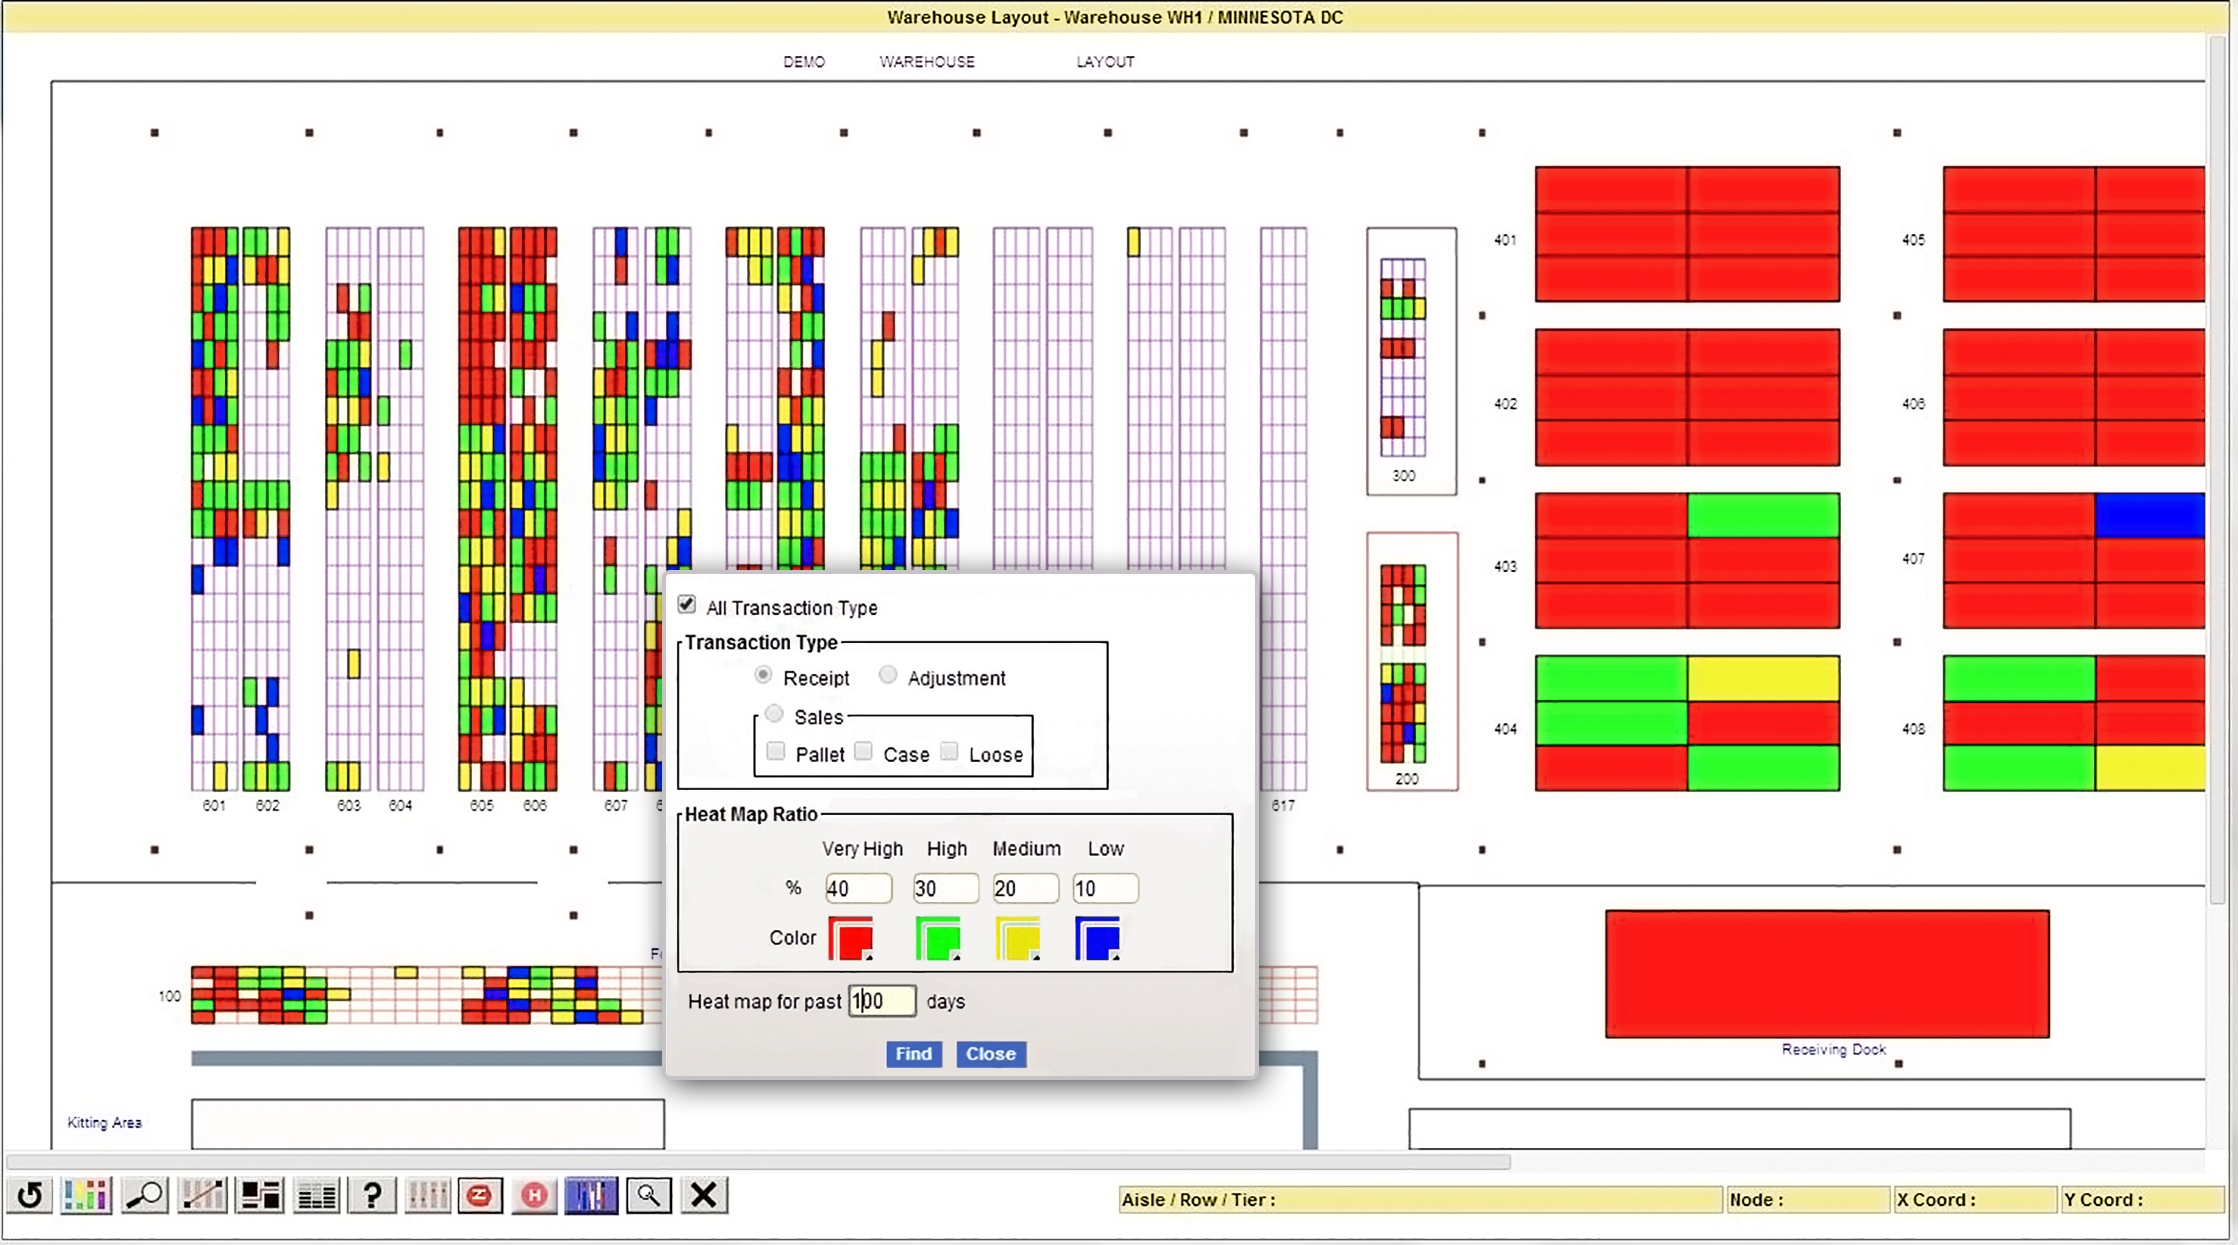 Softeon Warehouse Management System (WMS) Software - Warehouse Layout